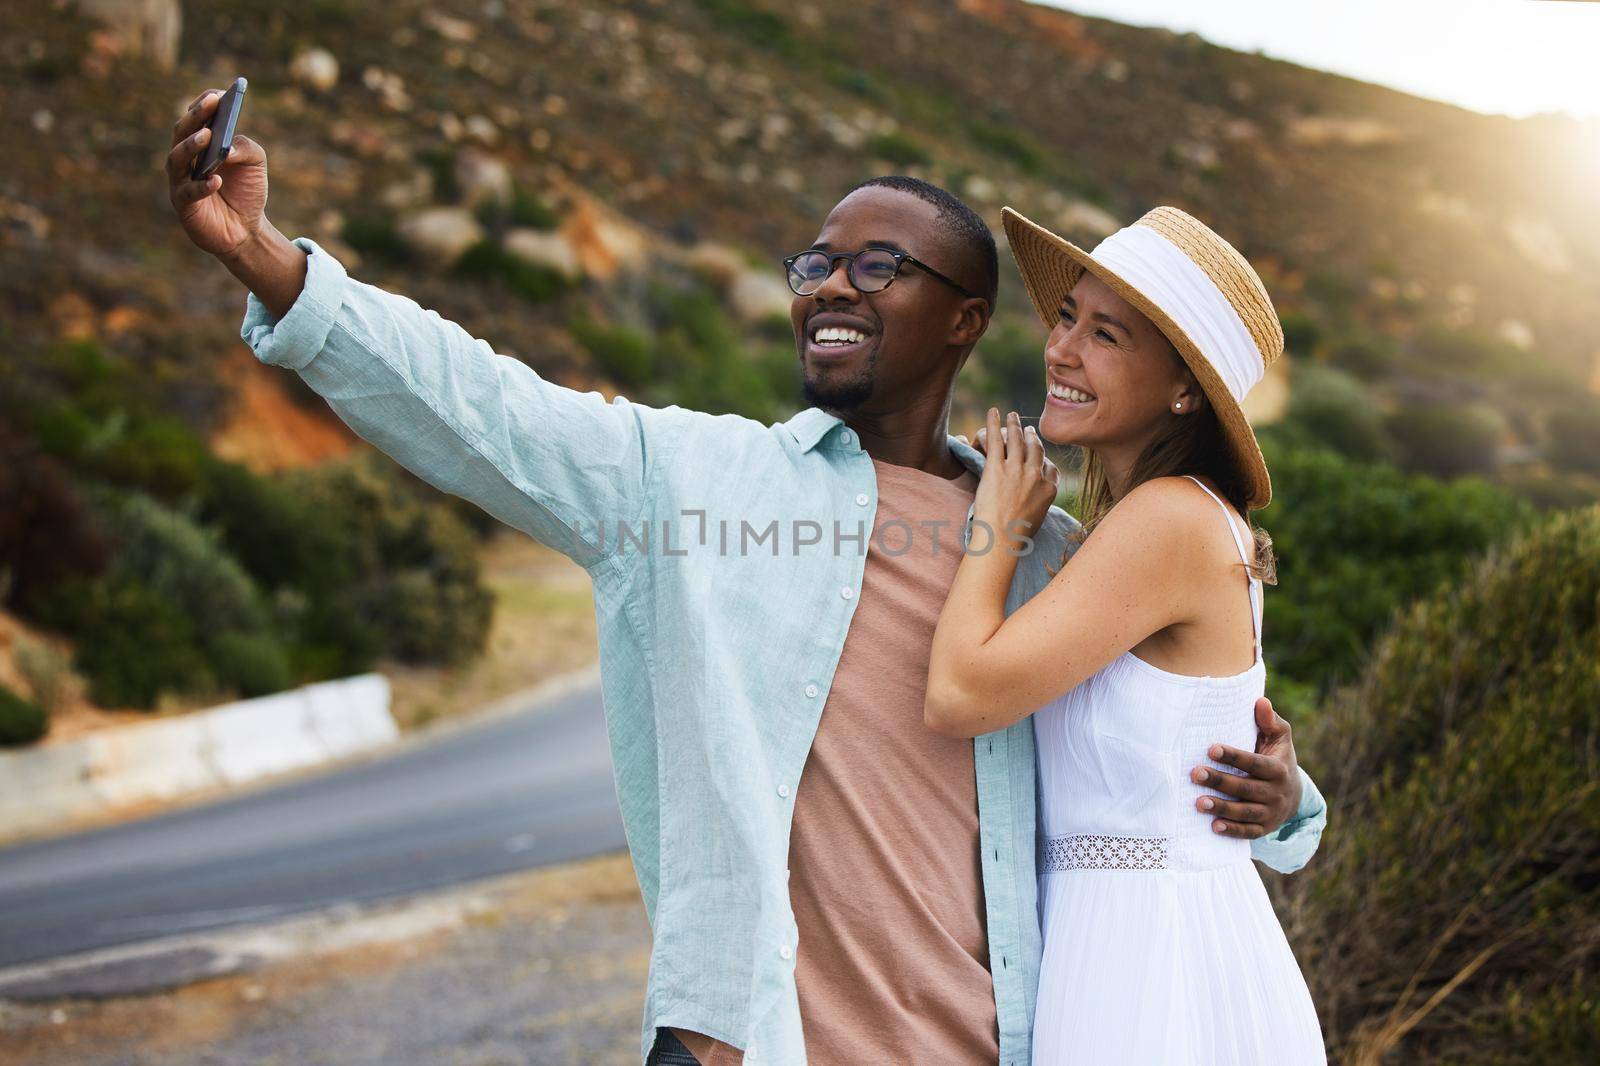 The more we travel the more memories we gain. a happy young couple taking selfies on a road trip